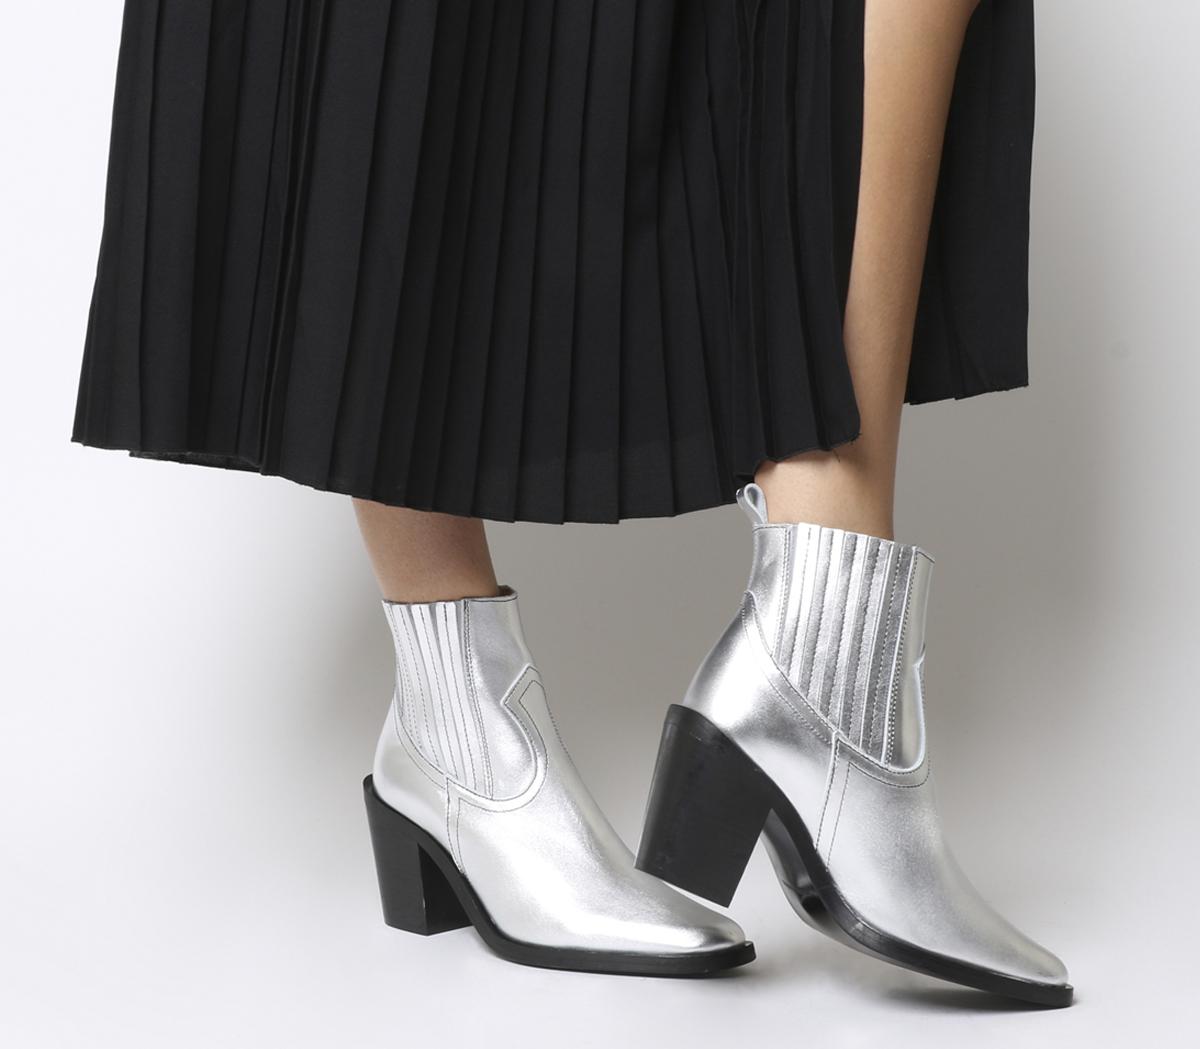 silver chelsea boots womens